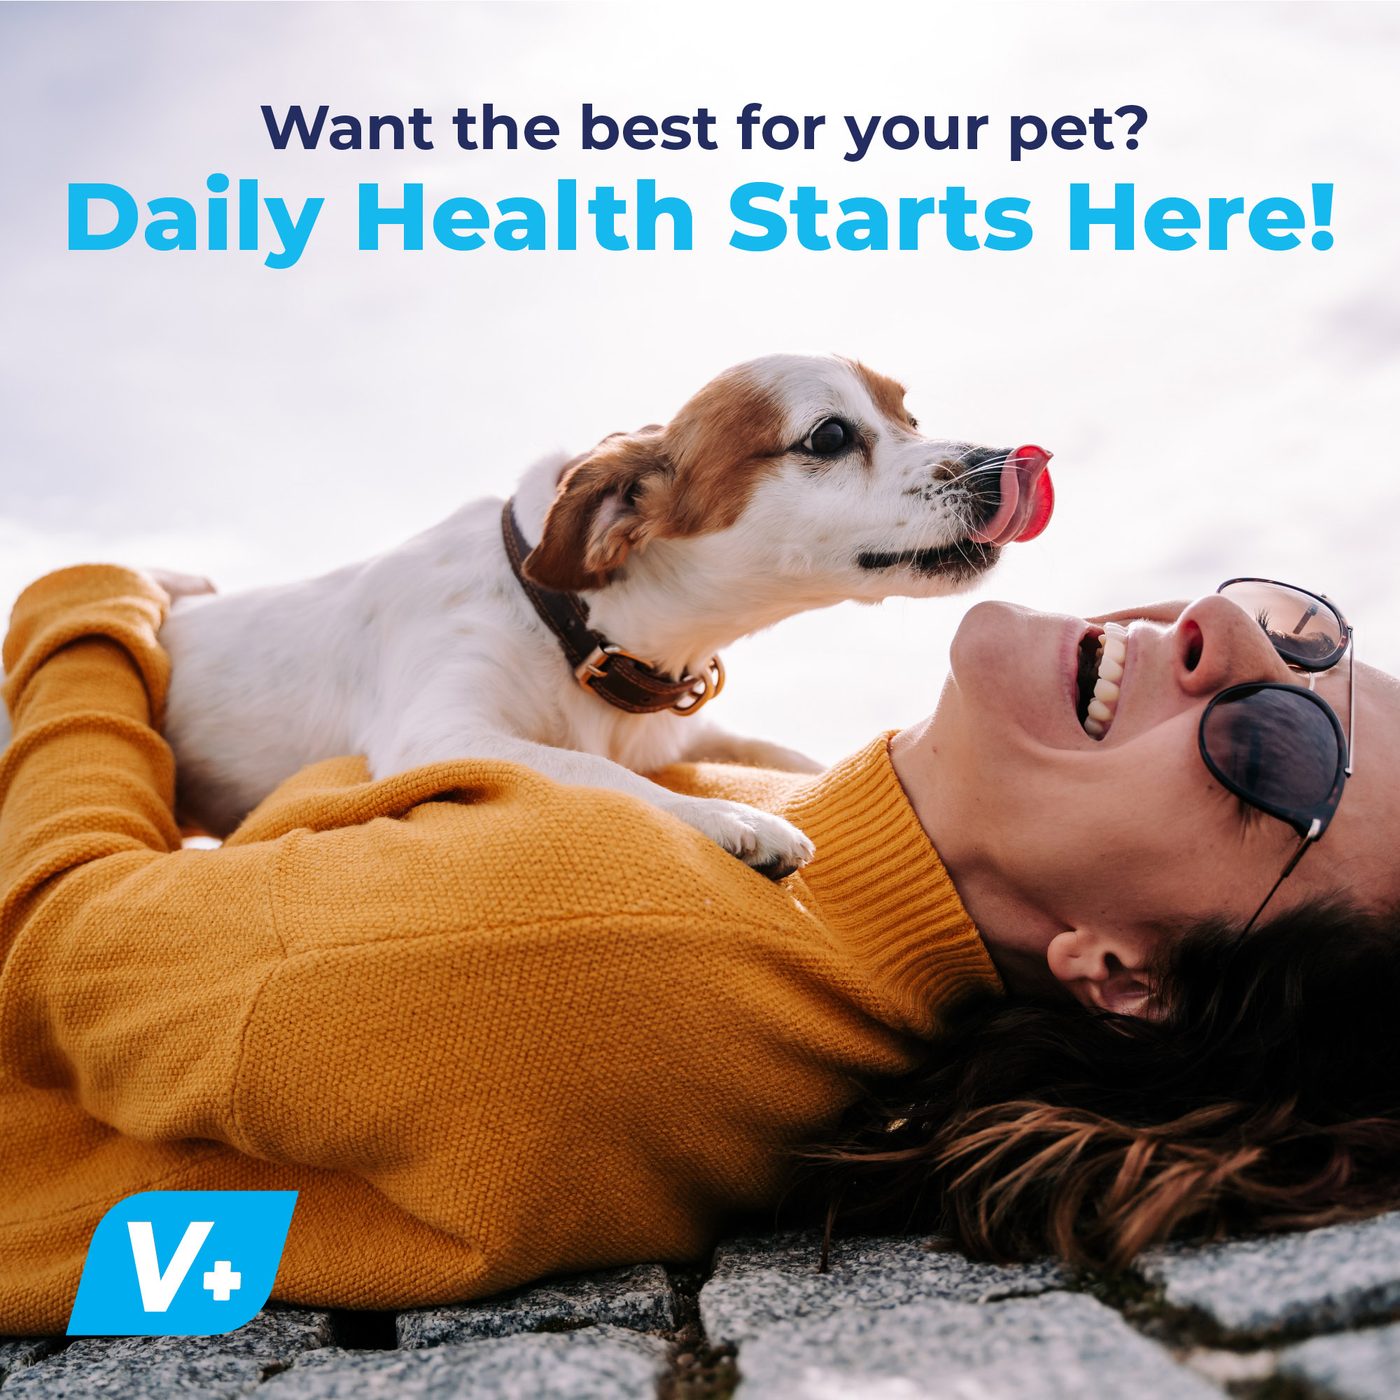 Daily health starts here!